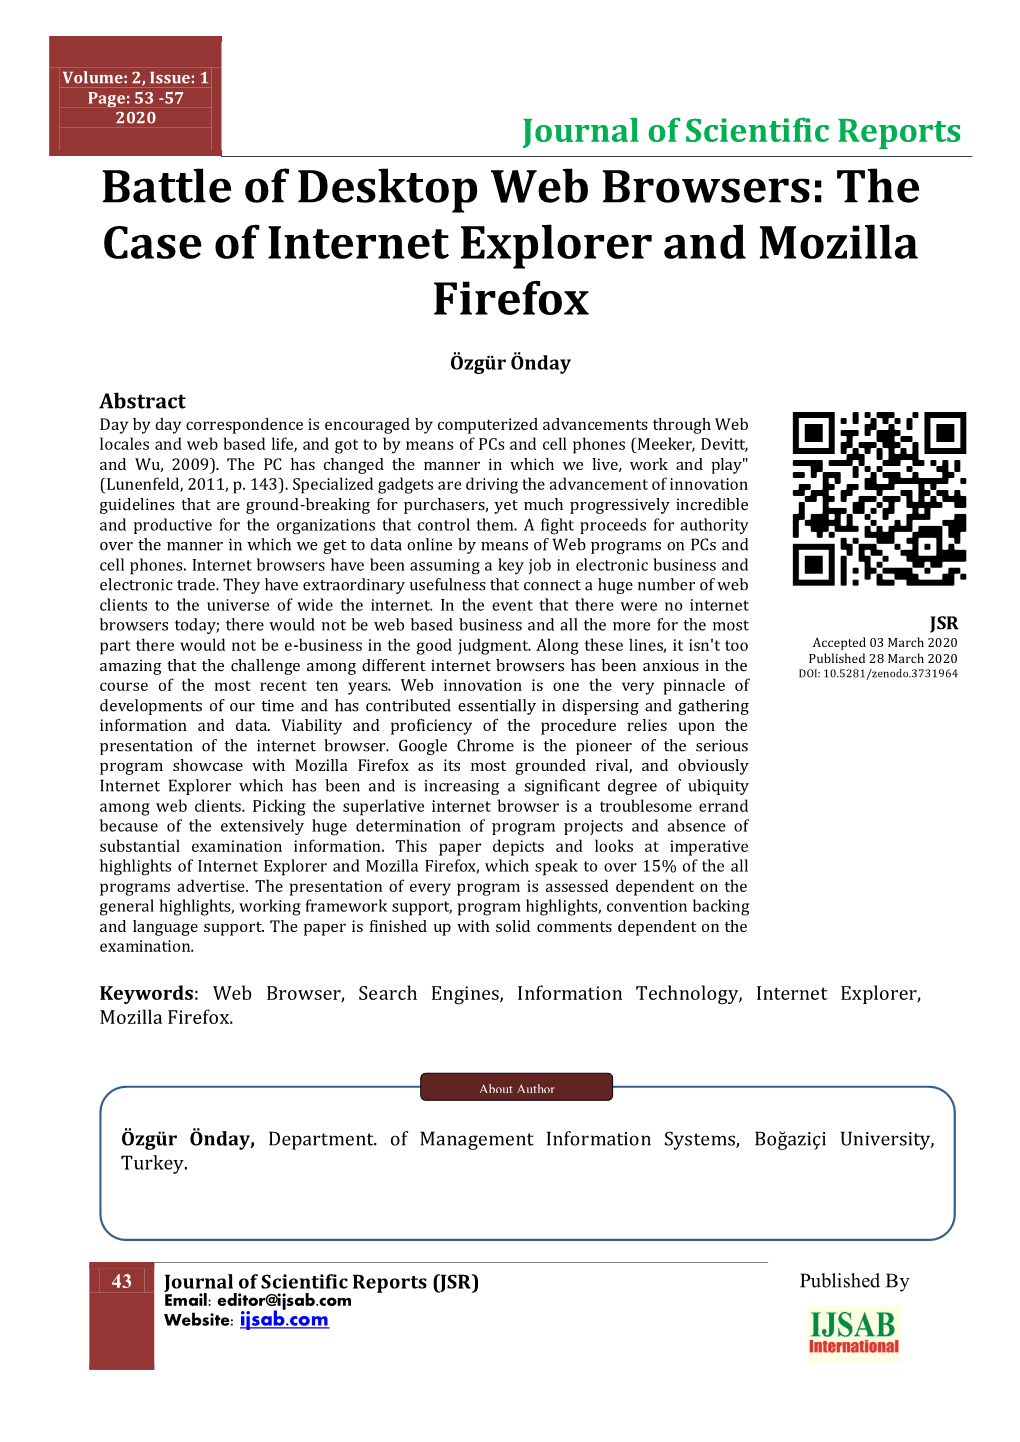 The Case of Internet Explorer and Mozilla Firefox